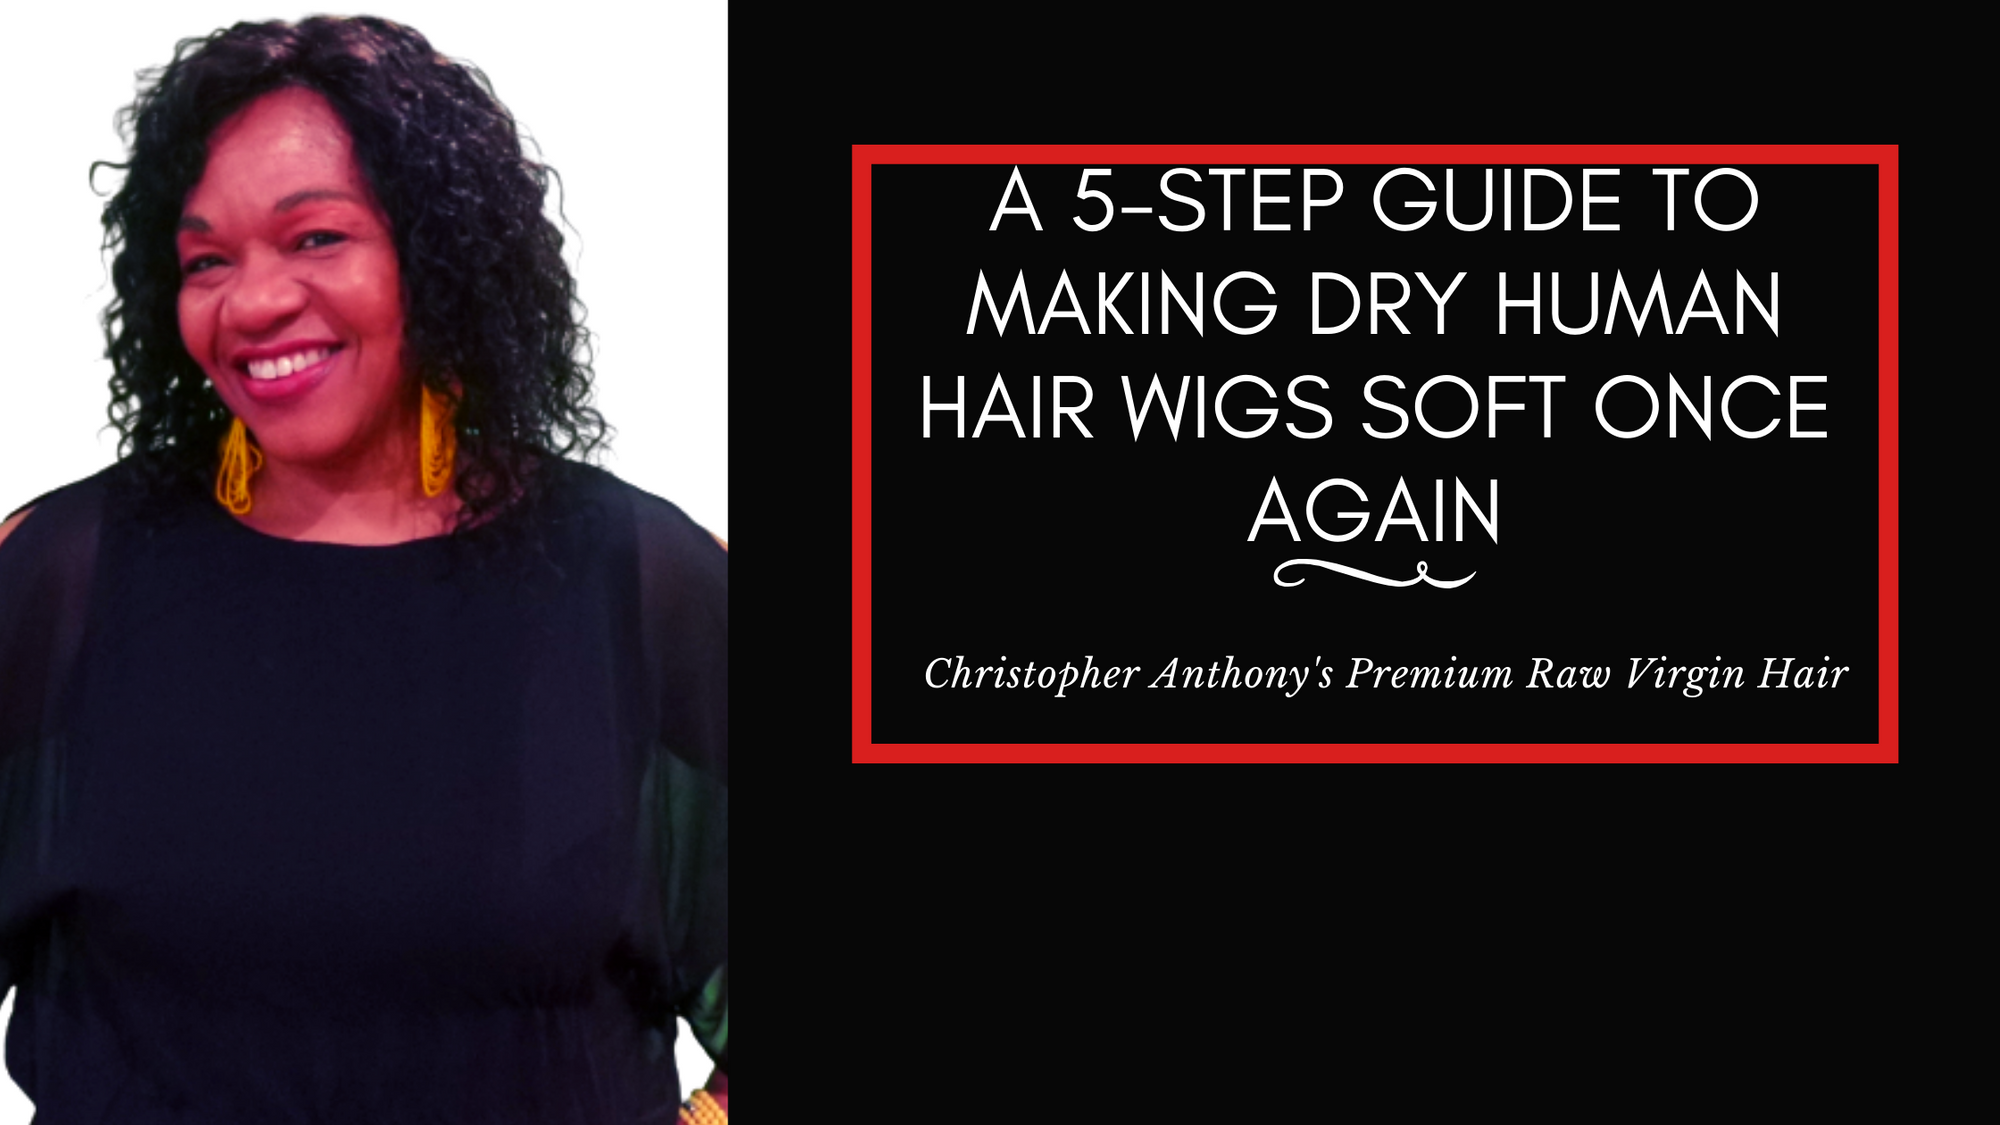 A 5-Step Guide to Making Dry Human Hair Wigs Soft Once Again